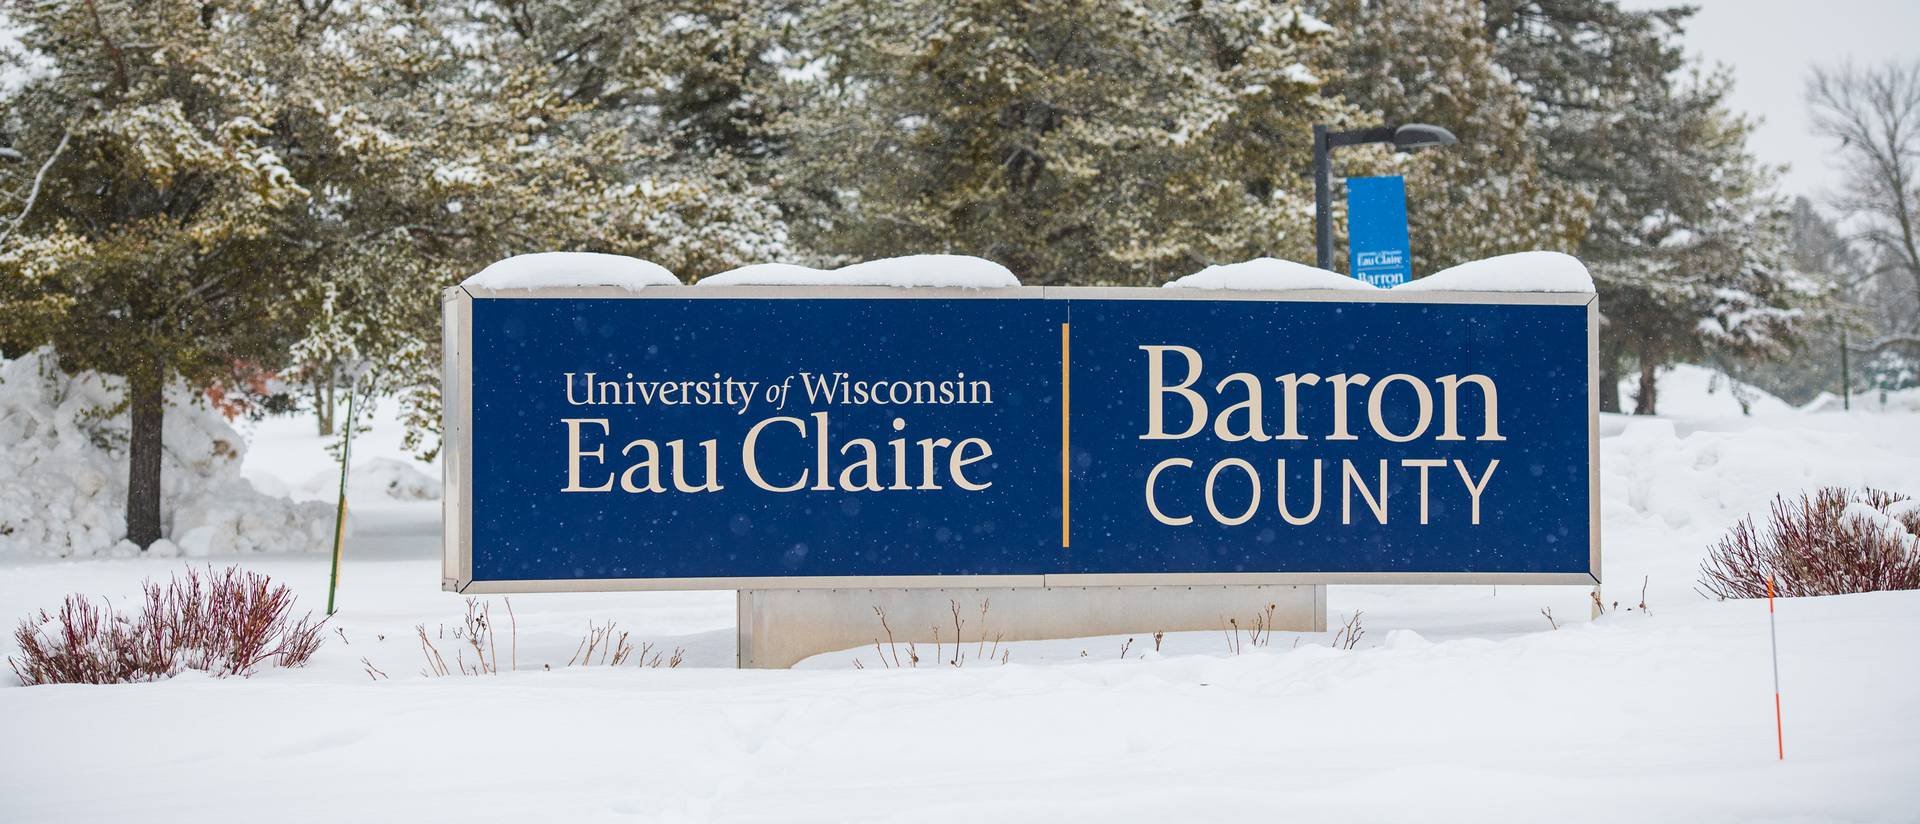 UW-Eau Claire – Barron County sign with snow, in winter